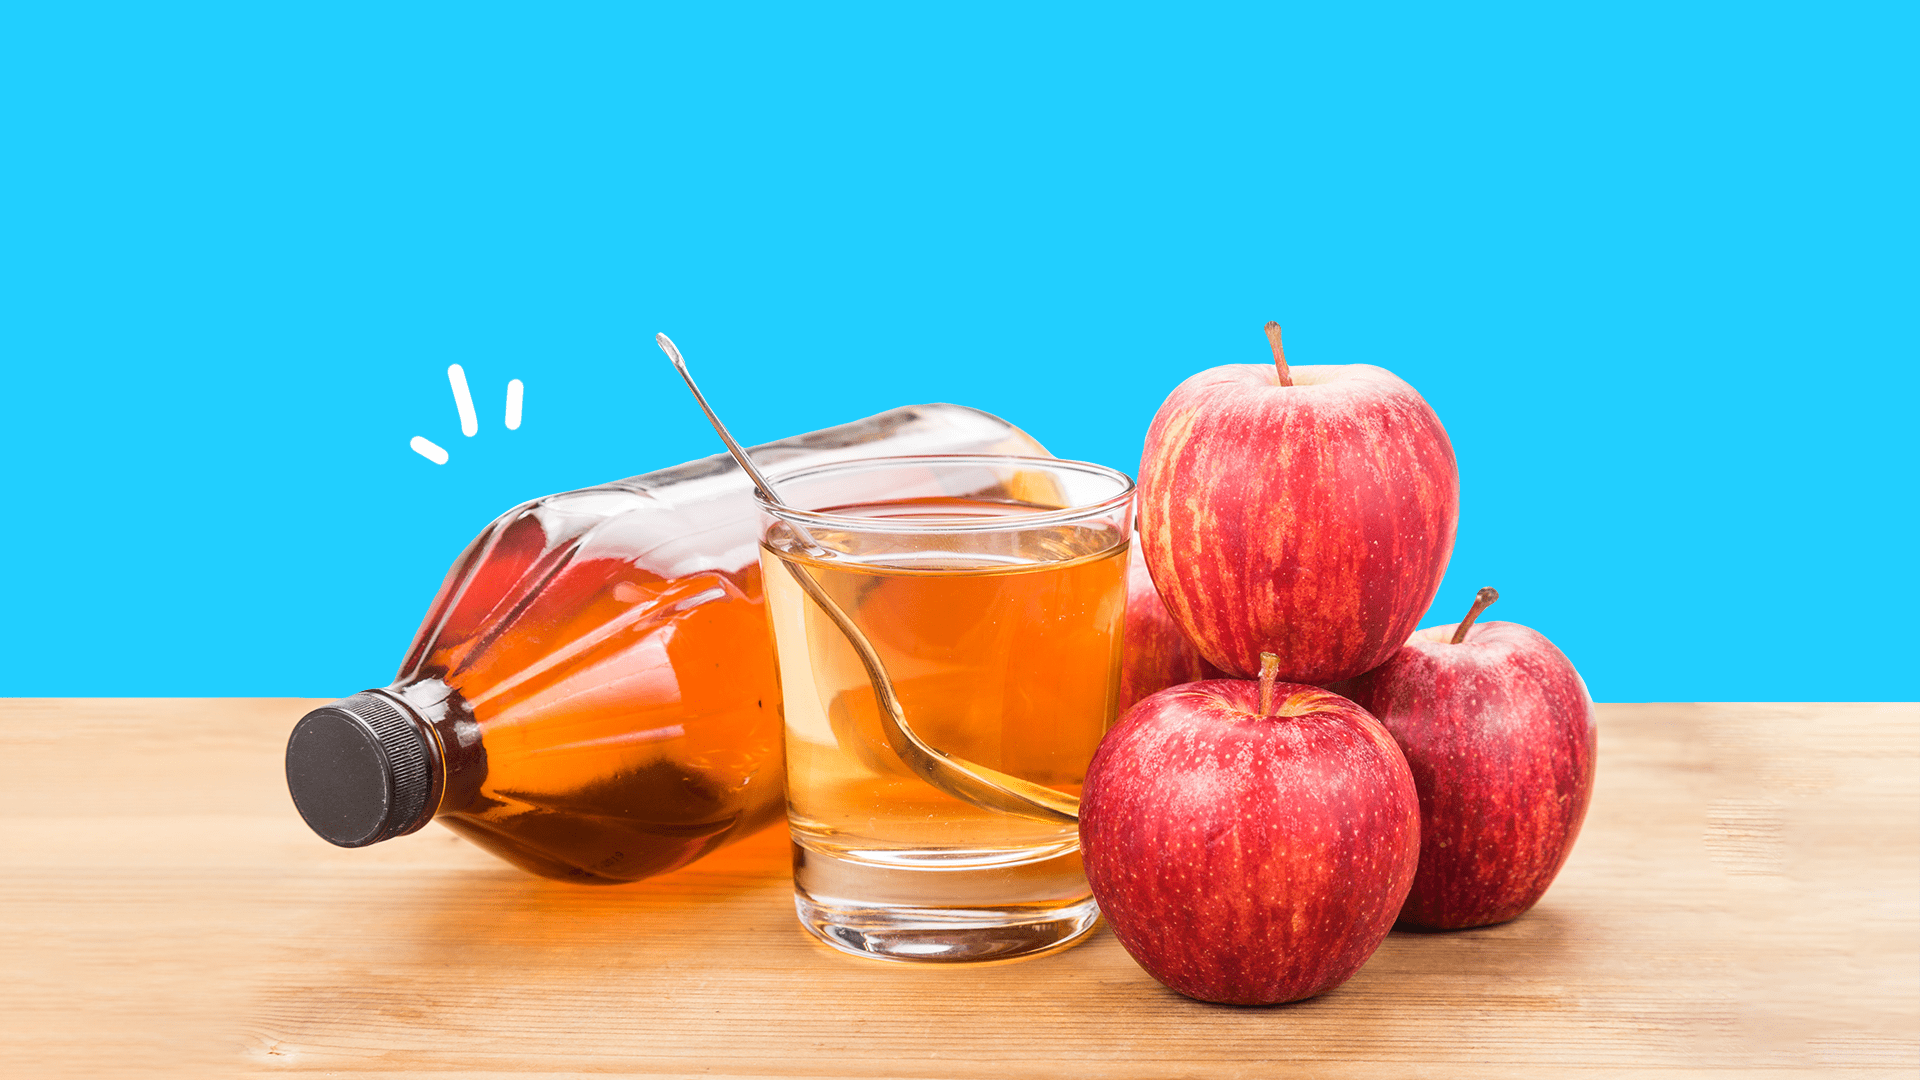 Does Apple Cider Vinegar Help With Weight Loss